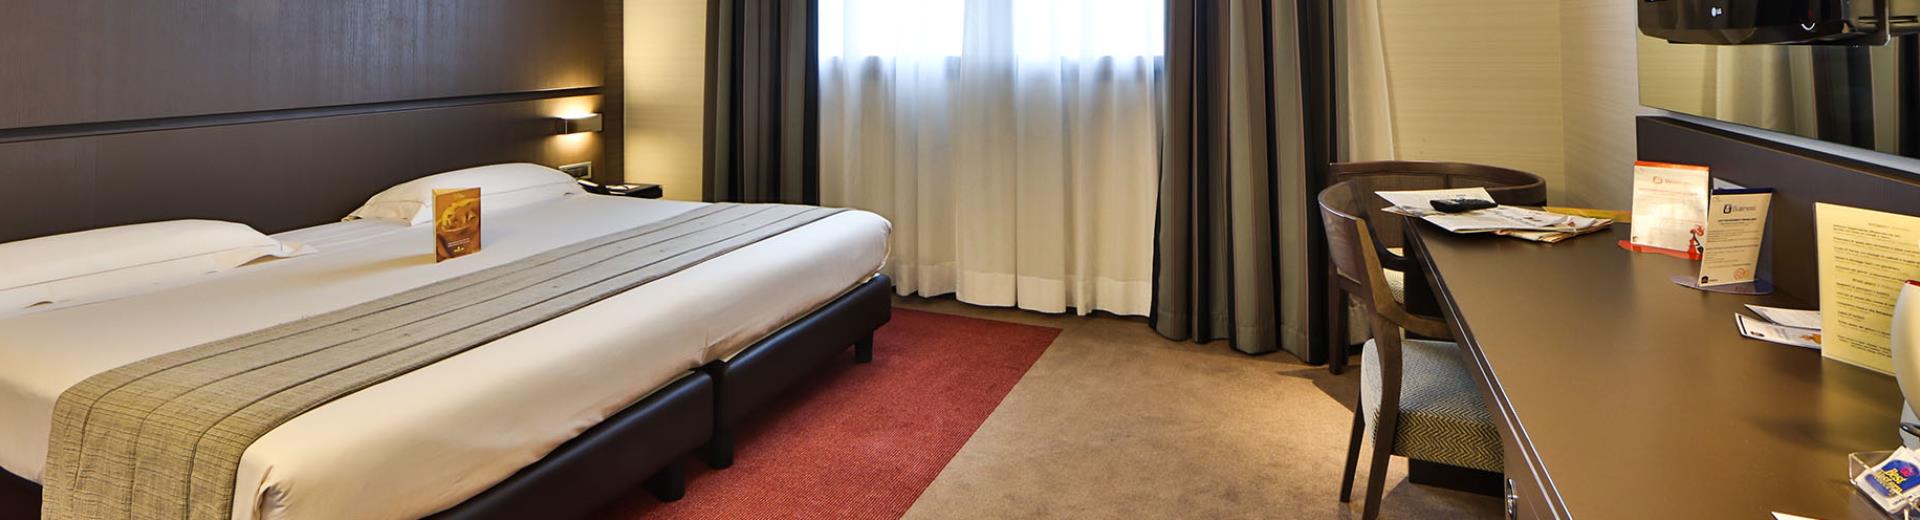 Discover the roomtypes of our 4 star hotel near Milan with every comfort for your business and leisure stay!